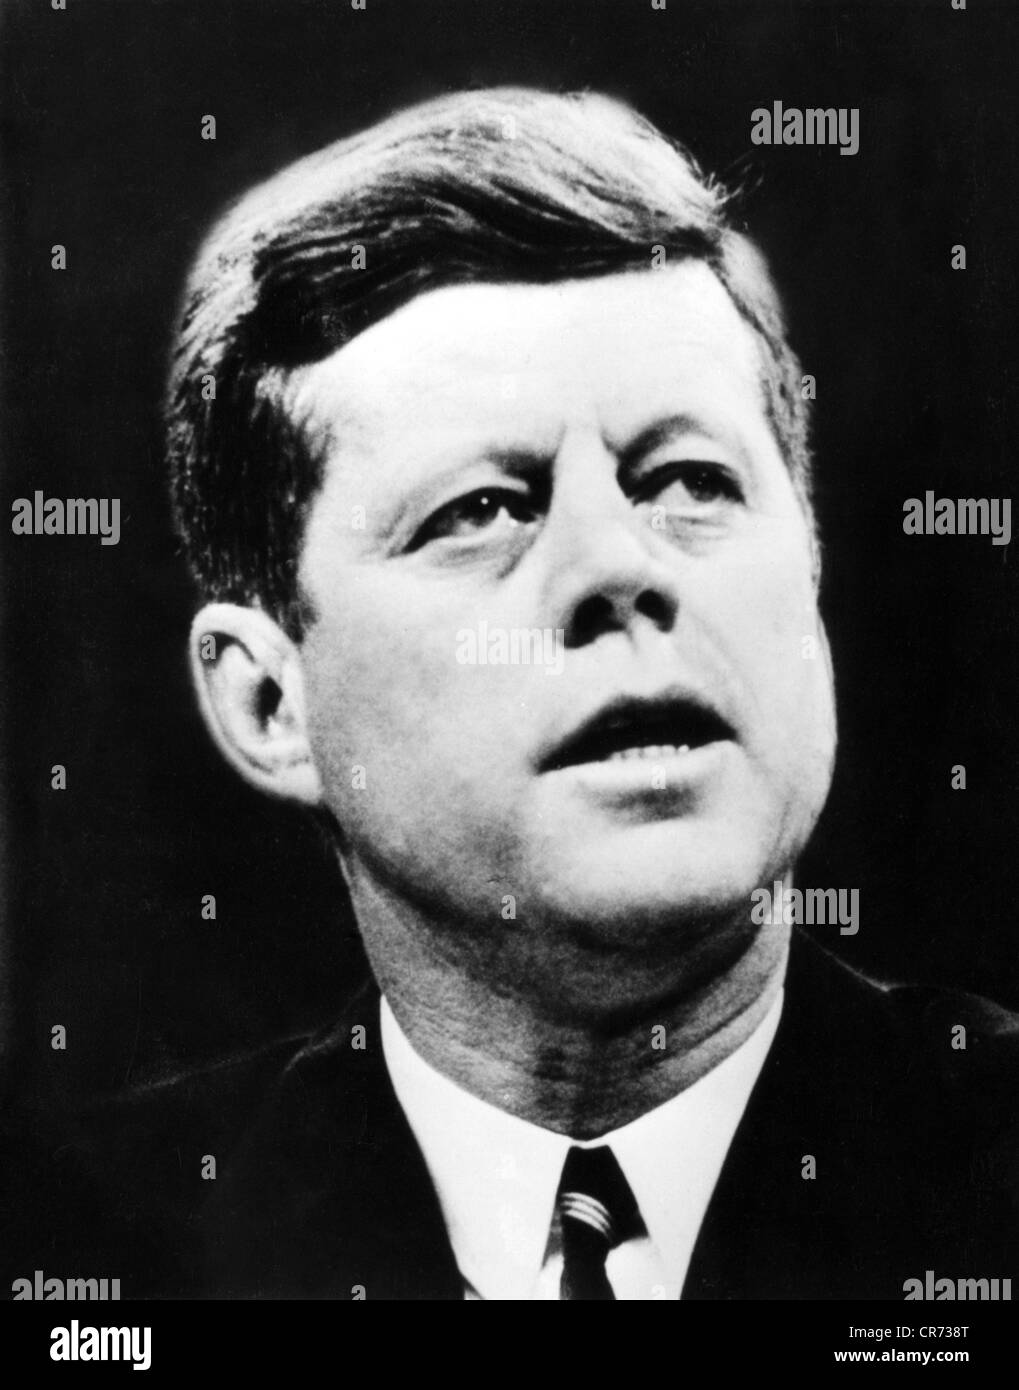 Kennedy, John Fitzgerald, 29.5.1917 - 22.11.1963, American politician (Dem.), President of the USA 20.1.1961 - 22.11.1963, portrait, early 1960s, , Stock Photo